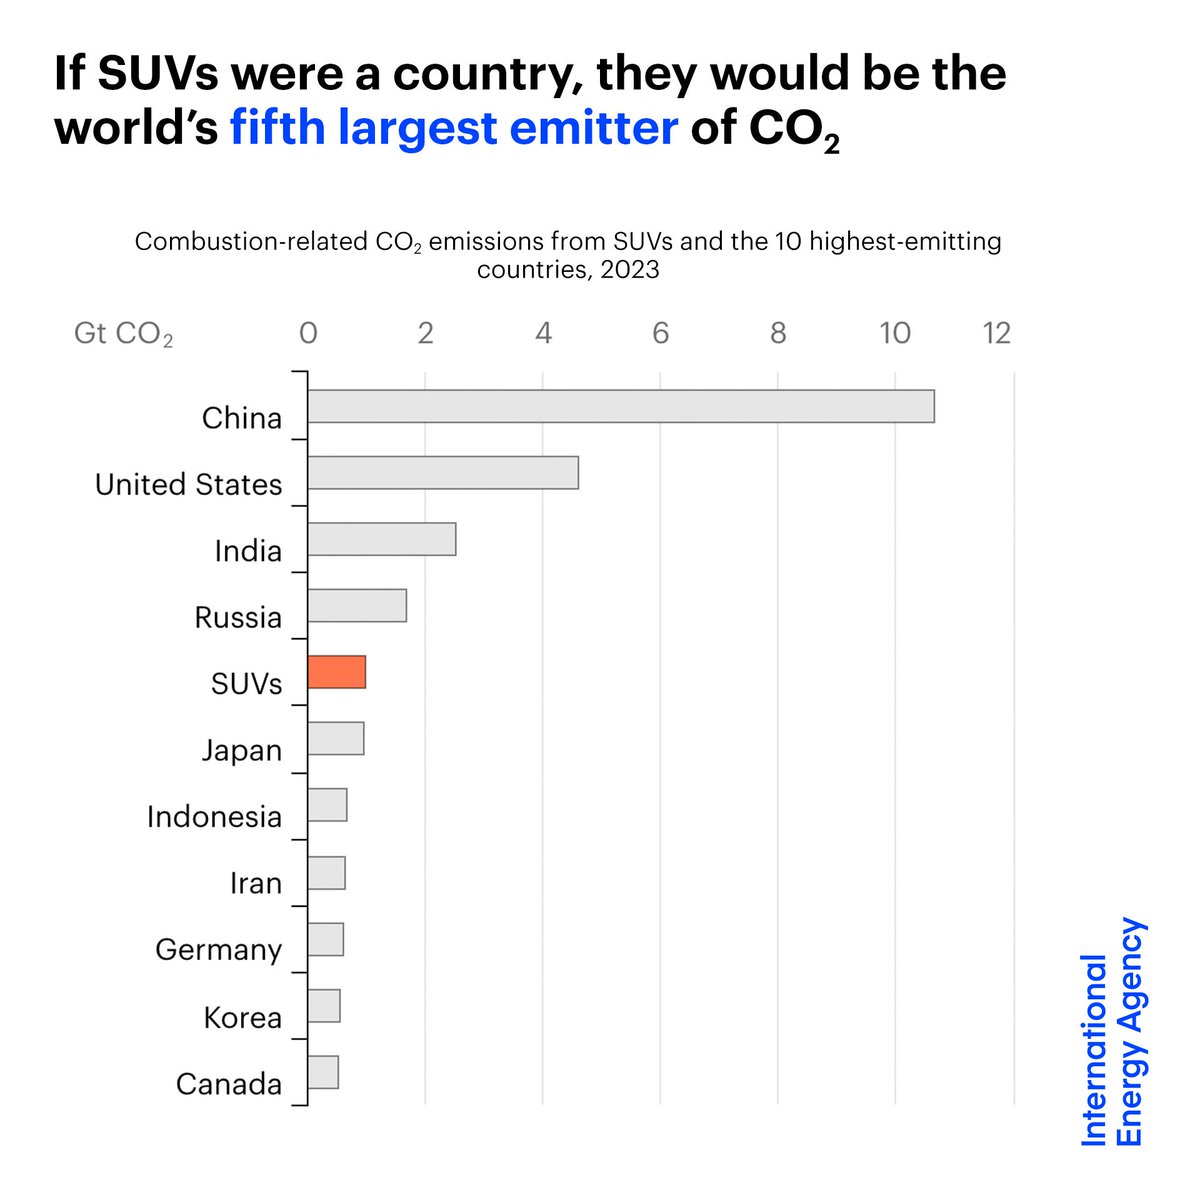 SUVs are setting new sales records each year — & so are their emissions If SUVs were a country, they would be the world’s 5th largest emitter of CO2 Read more in our new commentary on what this means for efforts to reach energy & climate goals ➡️ iea.li/3V1wgVb